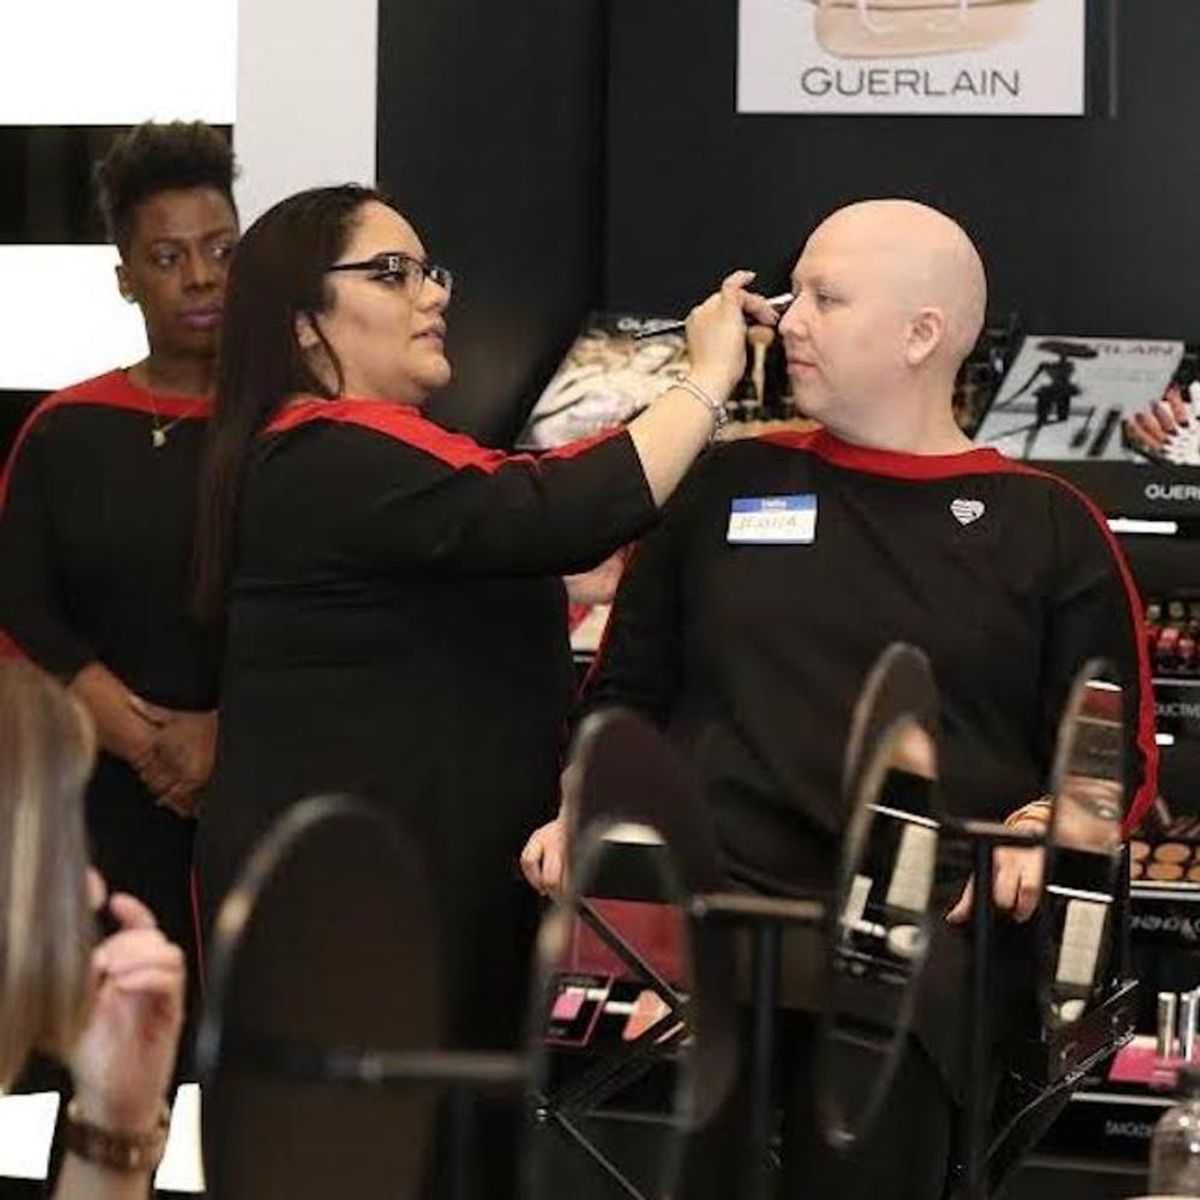 Sephora Is Launching Free Beauty Classes for Cancer Treatment Patients